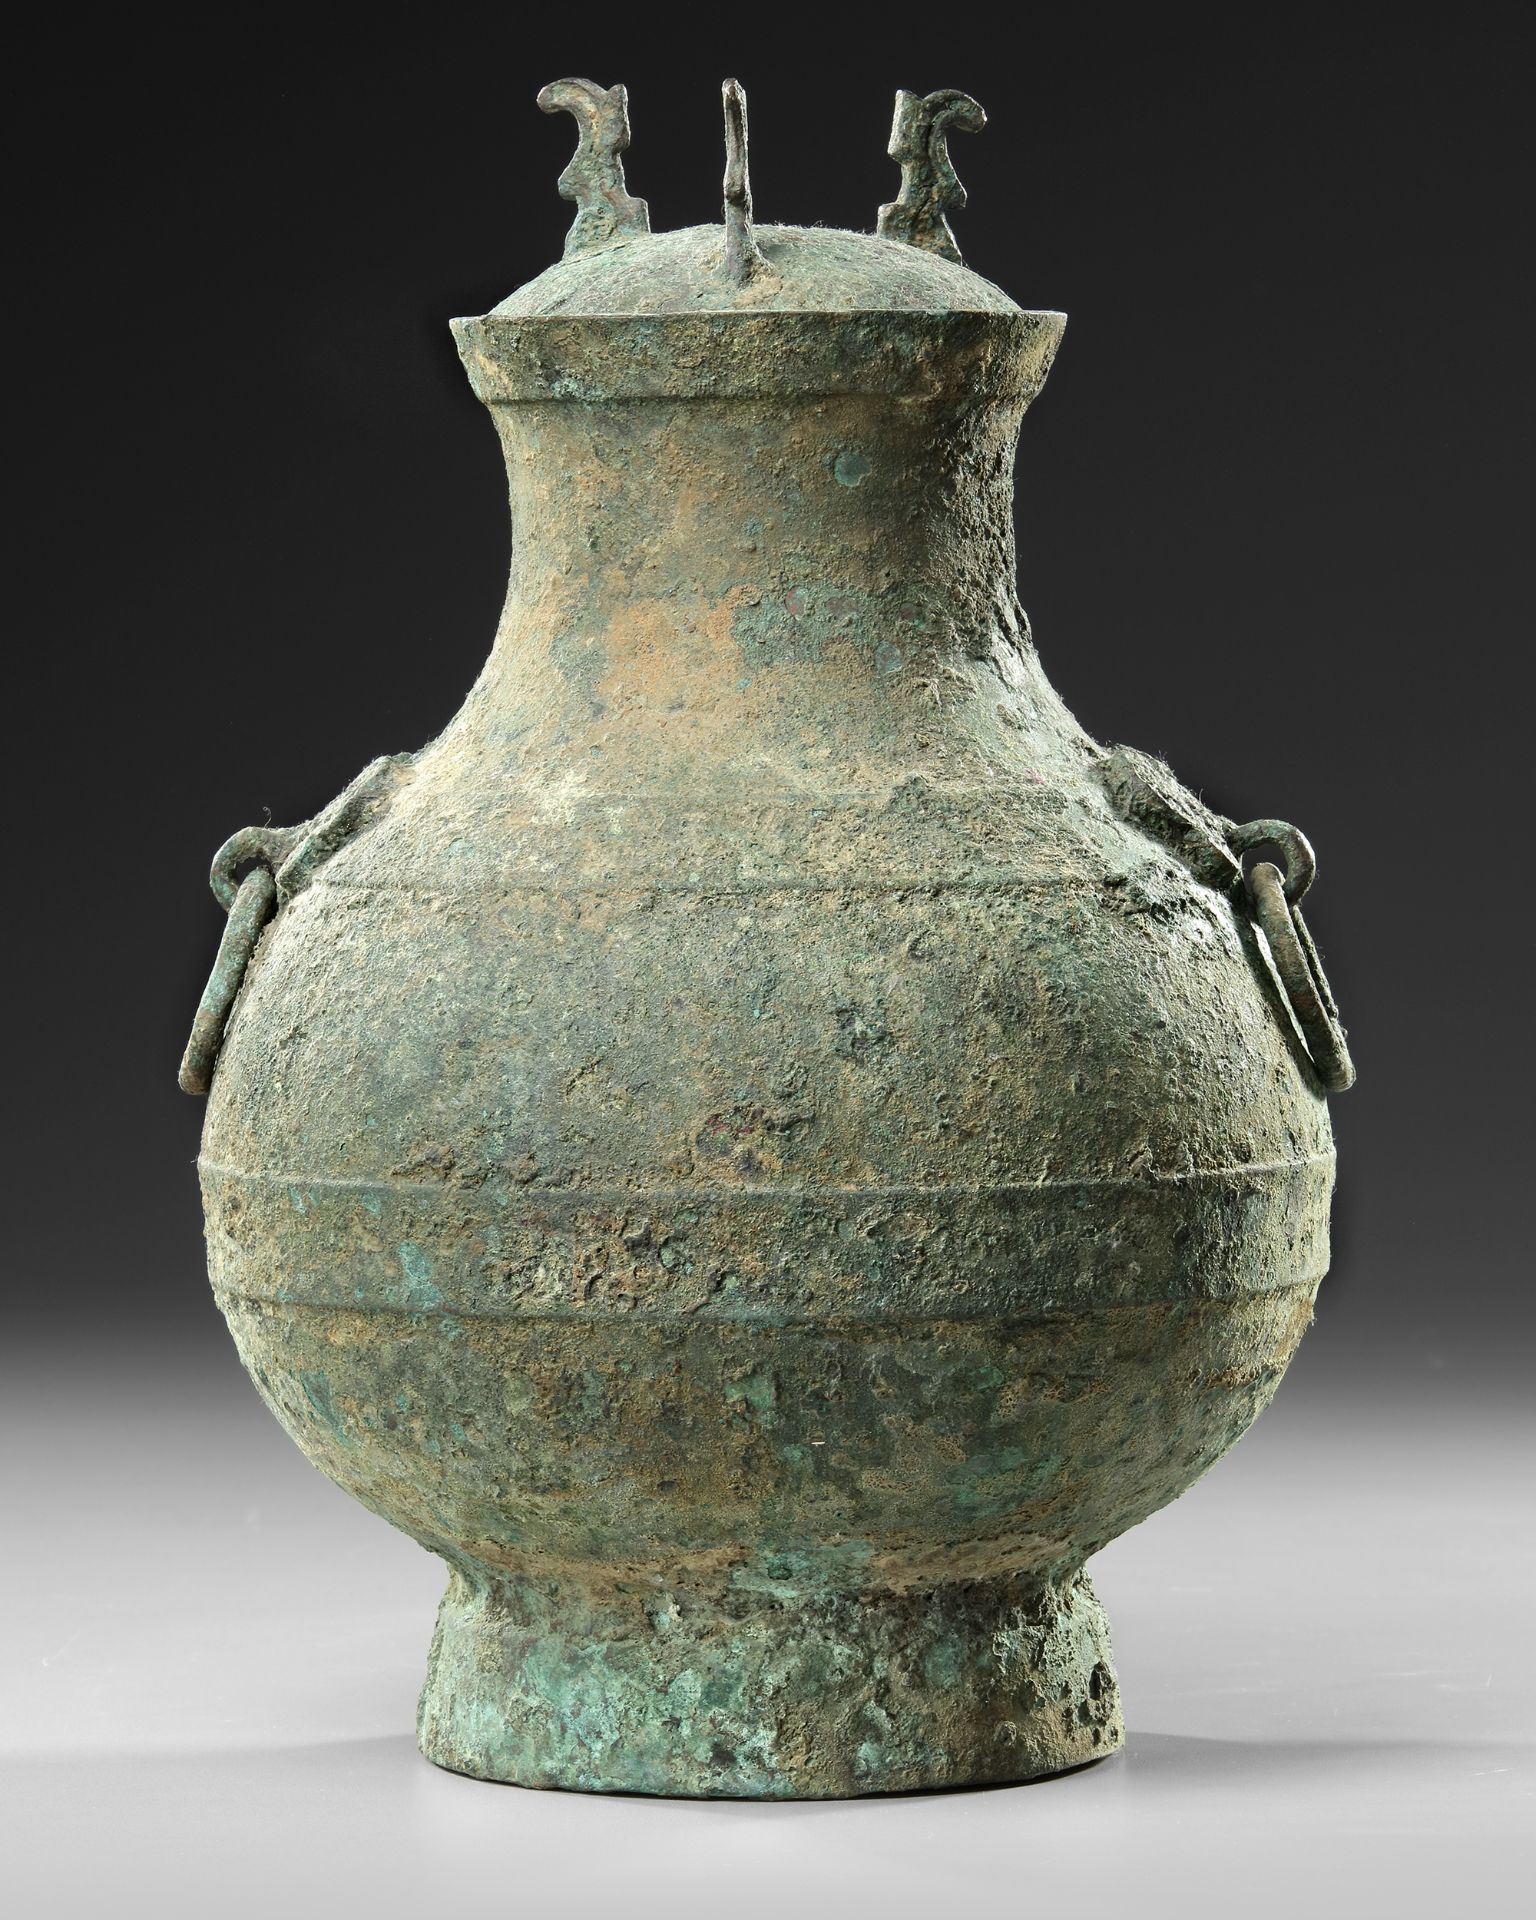 A CHINESE BRONZE RITUAL HU VASE, HAN DYNASTY (206 BC-220 AD) OR LATER